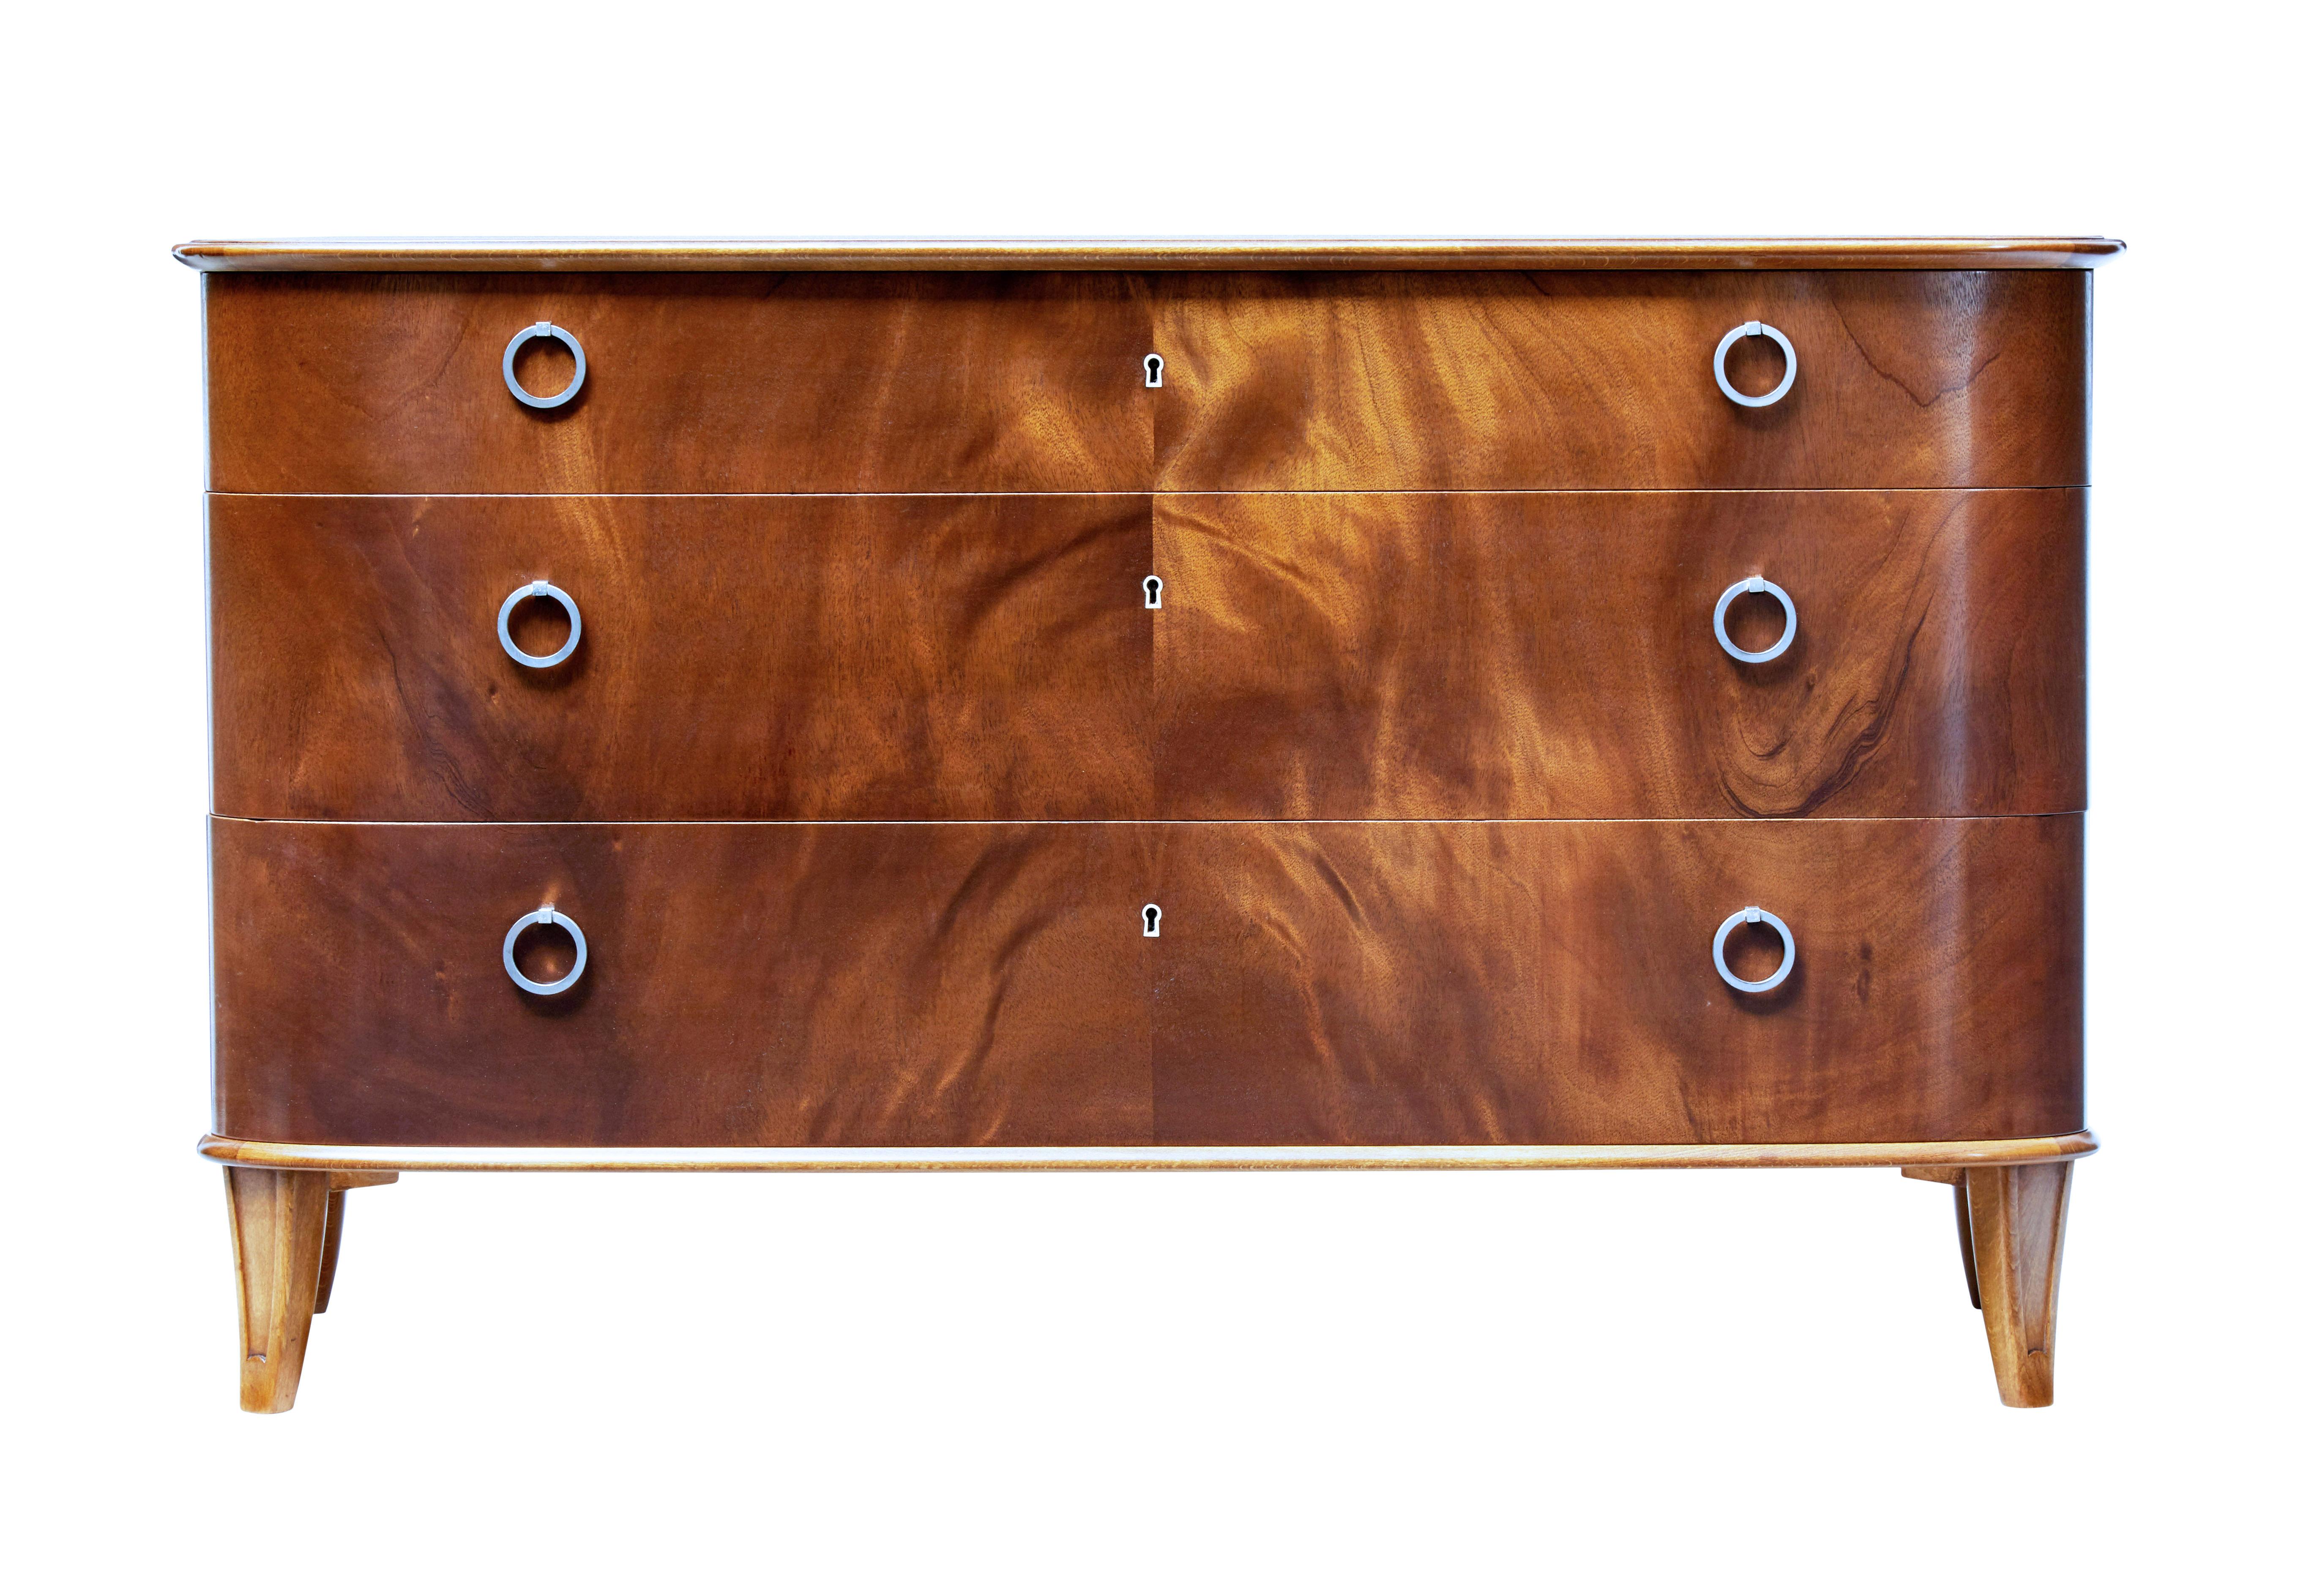 Mid-20th century mahogany chest of drawers Svensk Mobelindustri, circa 1950.

Fine quality shaped chest of drawers by Swedish retailers Svensk Mobelindustri.

Presented in excellent condition. 3 graduating drawers with matched flame mahogany